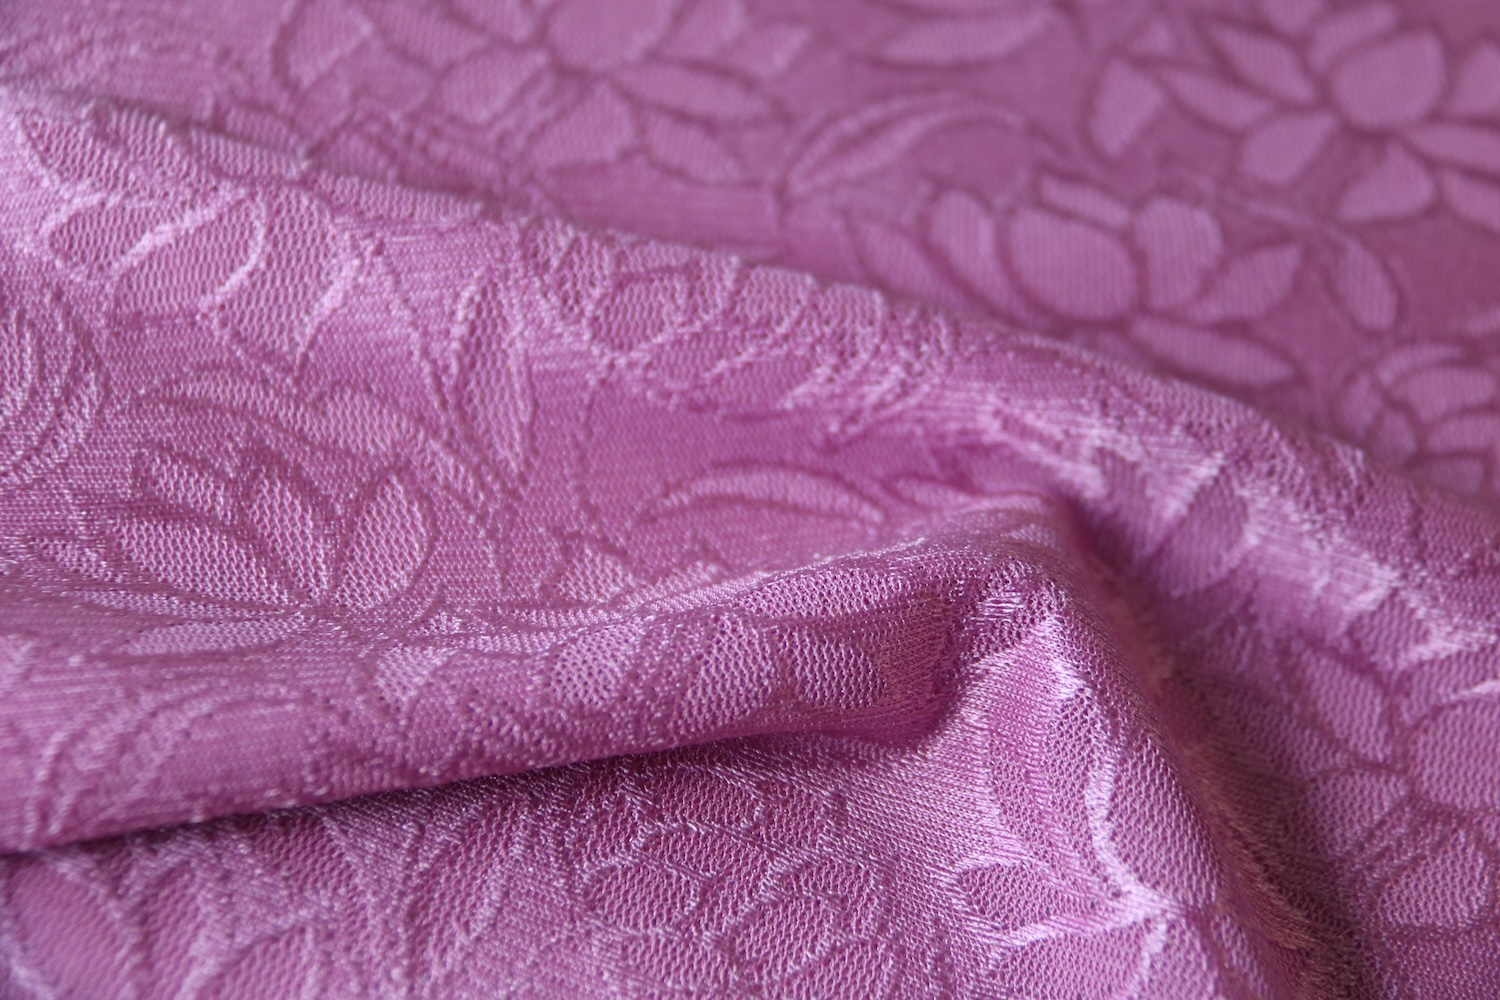 Rascheltronic knitted lace fabric. © Karl Mayer Group